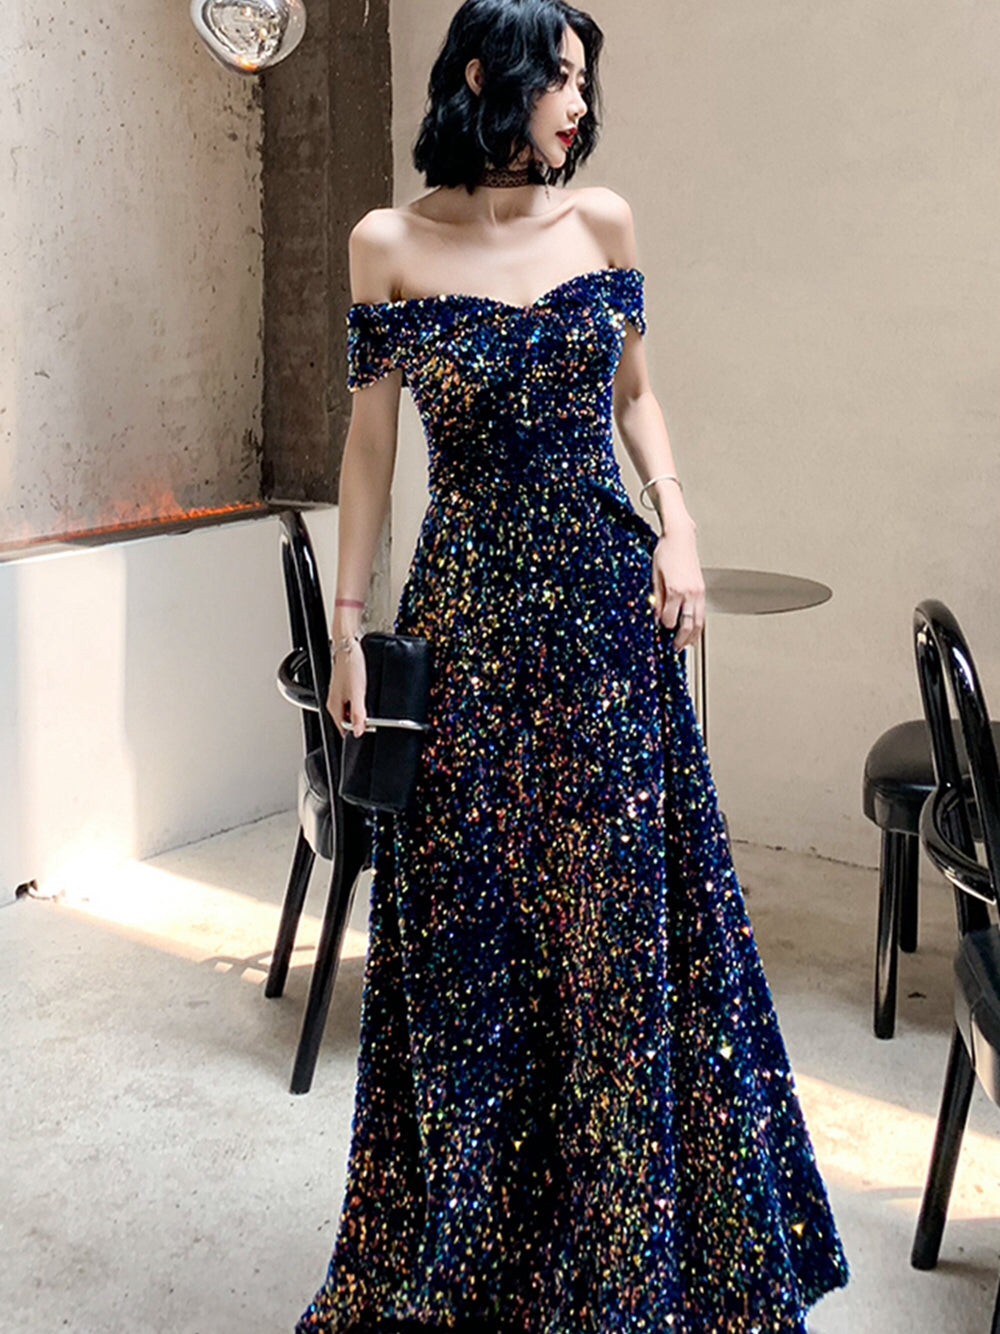 A-line Thick Sequin Long Prom Dresses, Off Shoulder Long Prom Dresses, 2020 Prom Dresses